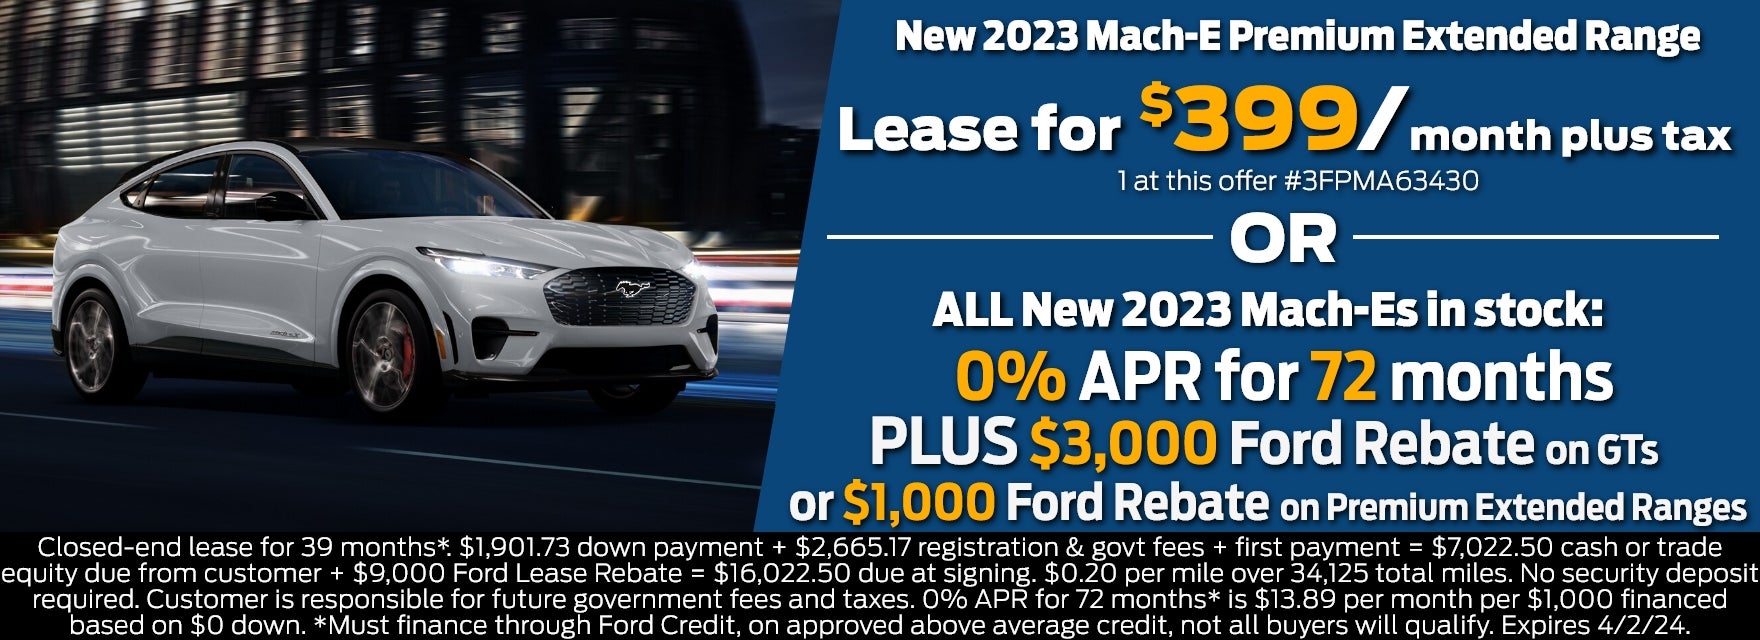 Mach-E Premium $399/month or 0% APR for 72 mos on ALL